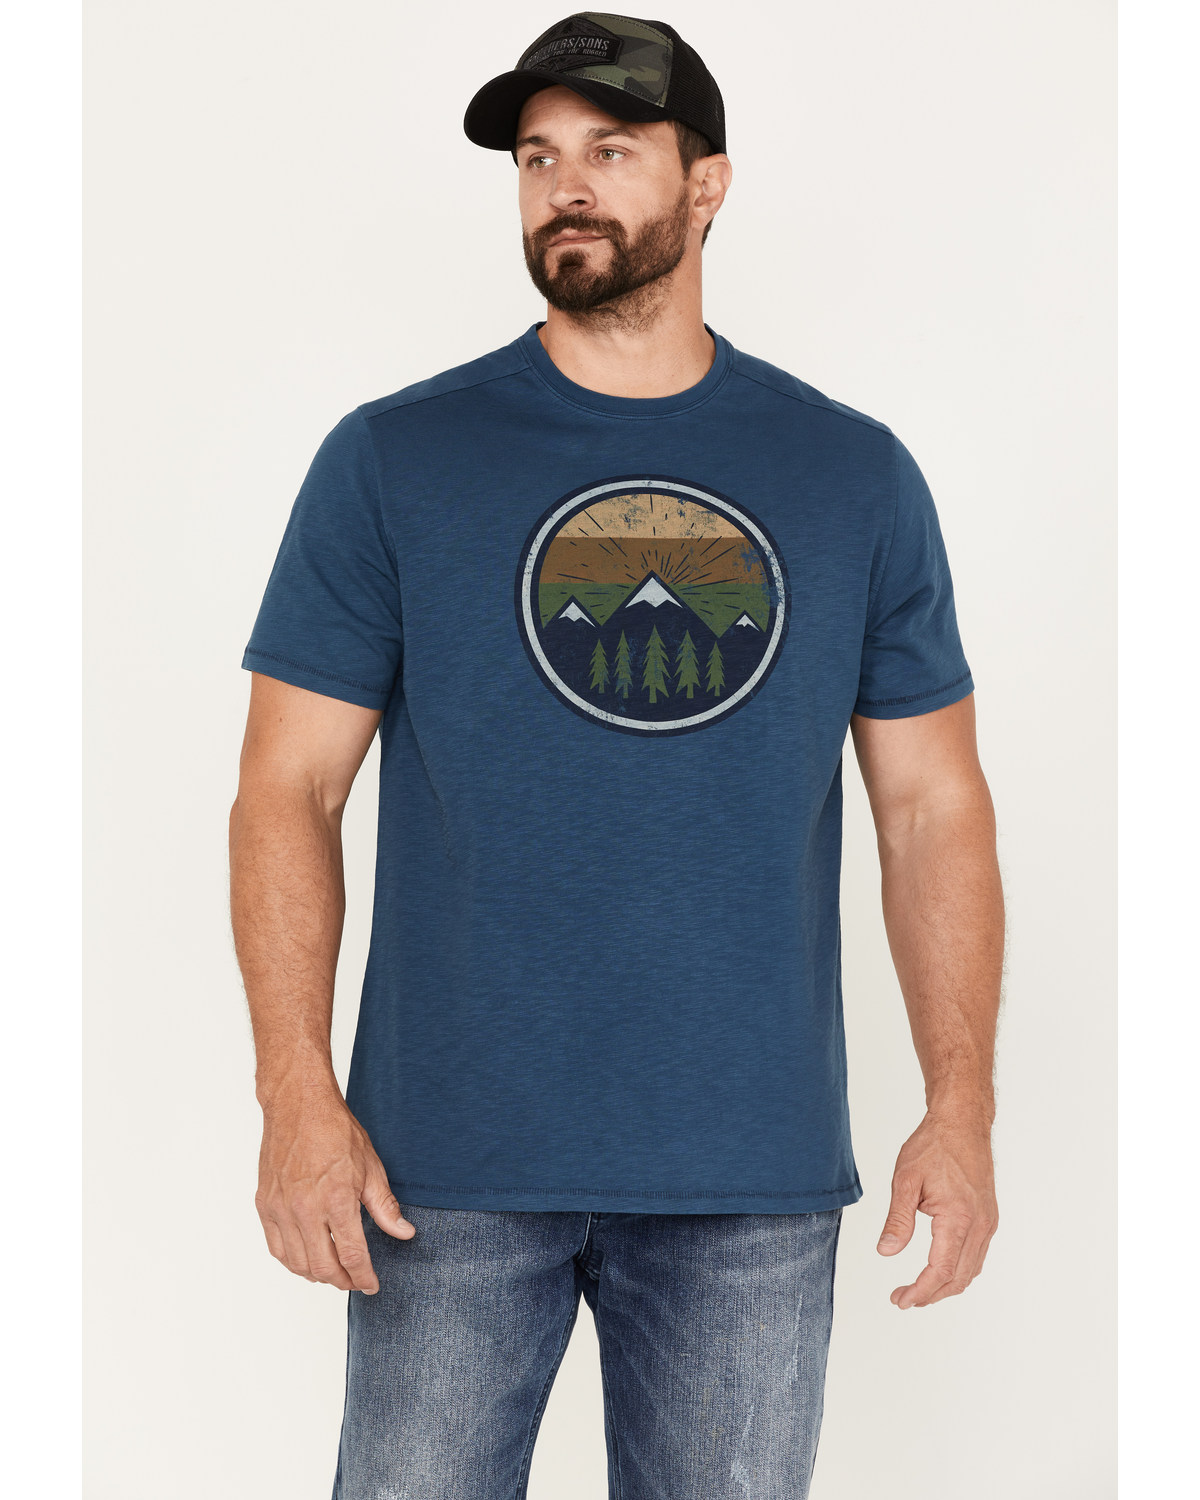 Brothers and Sons Men's Mountain Range Circle Graphic T-Shirt